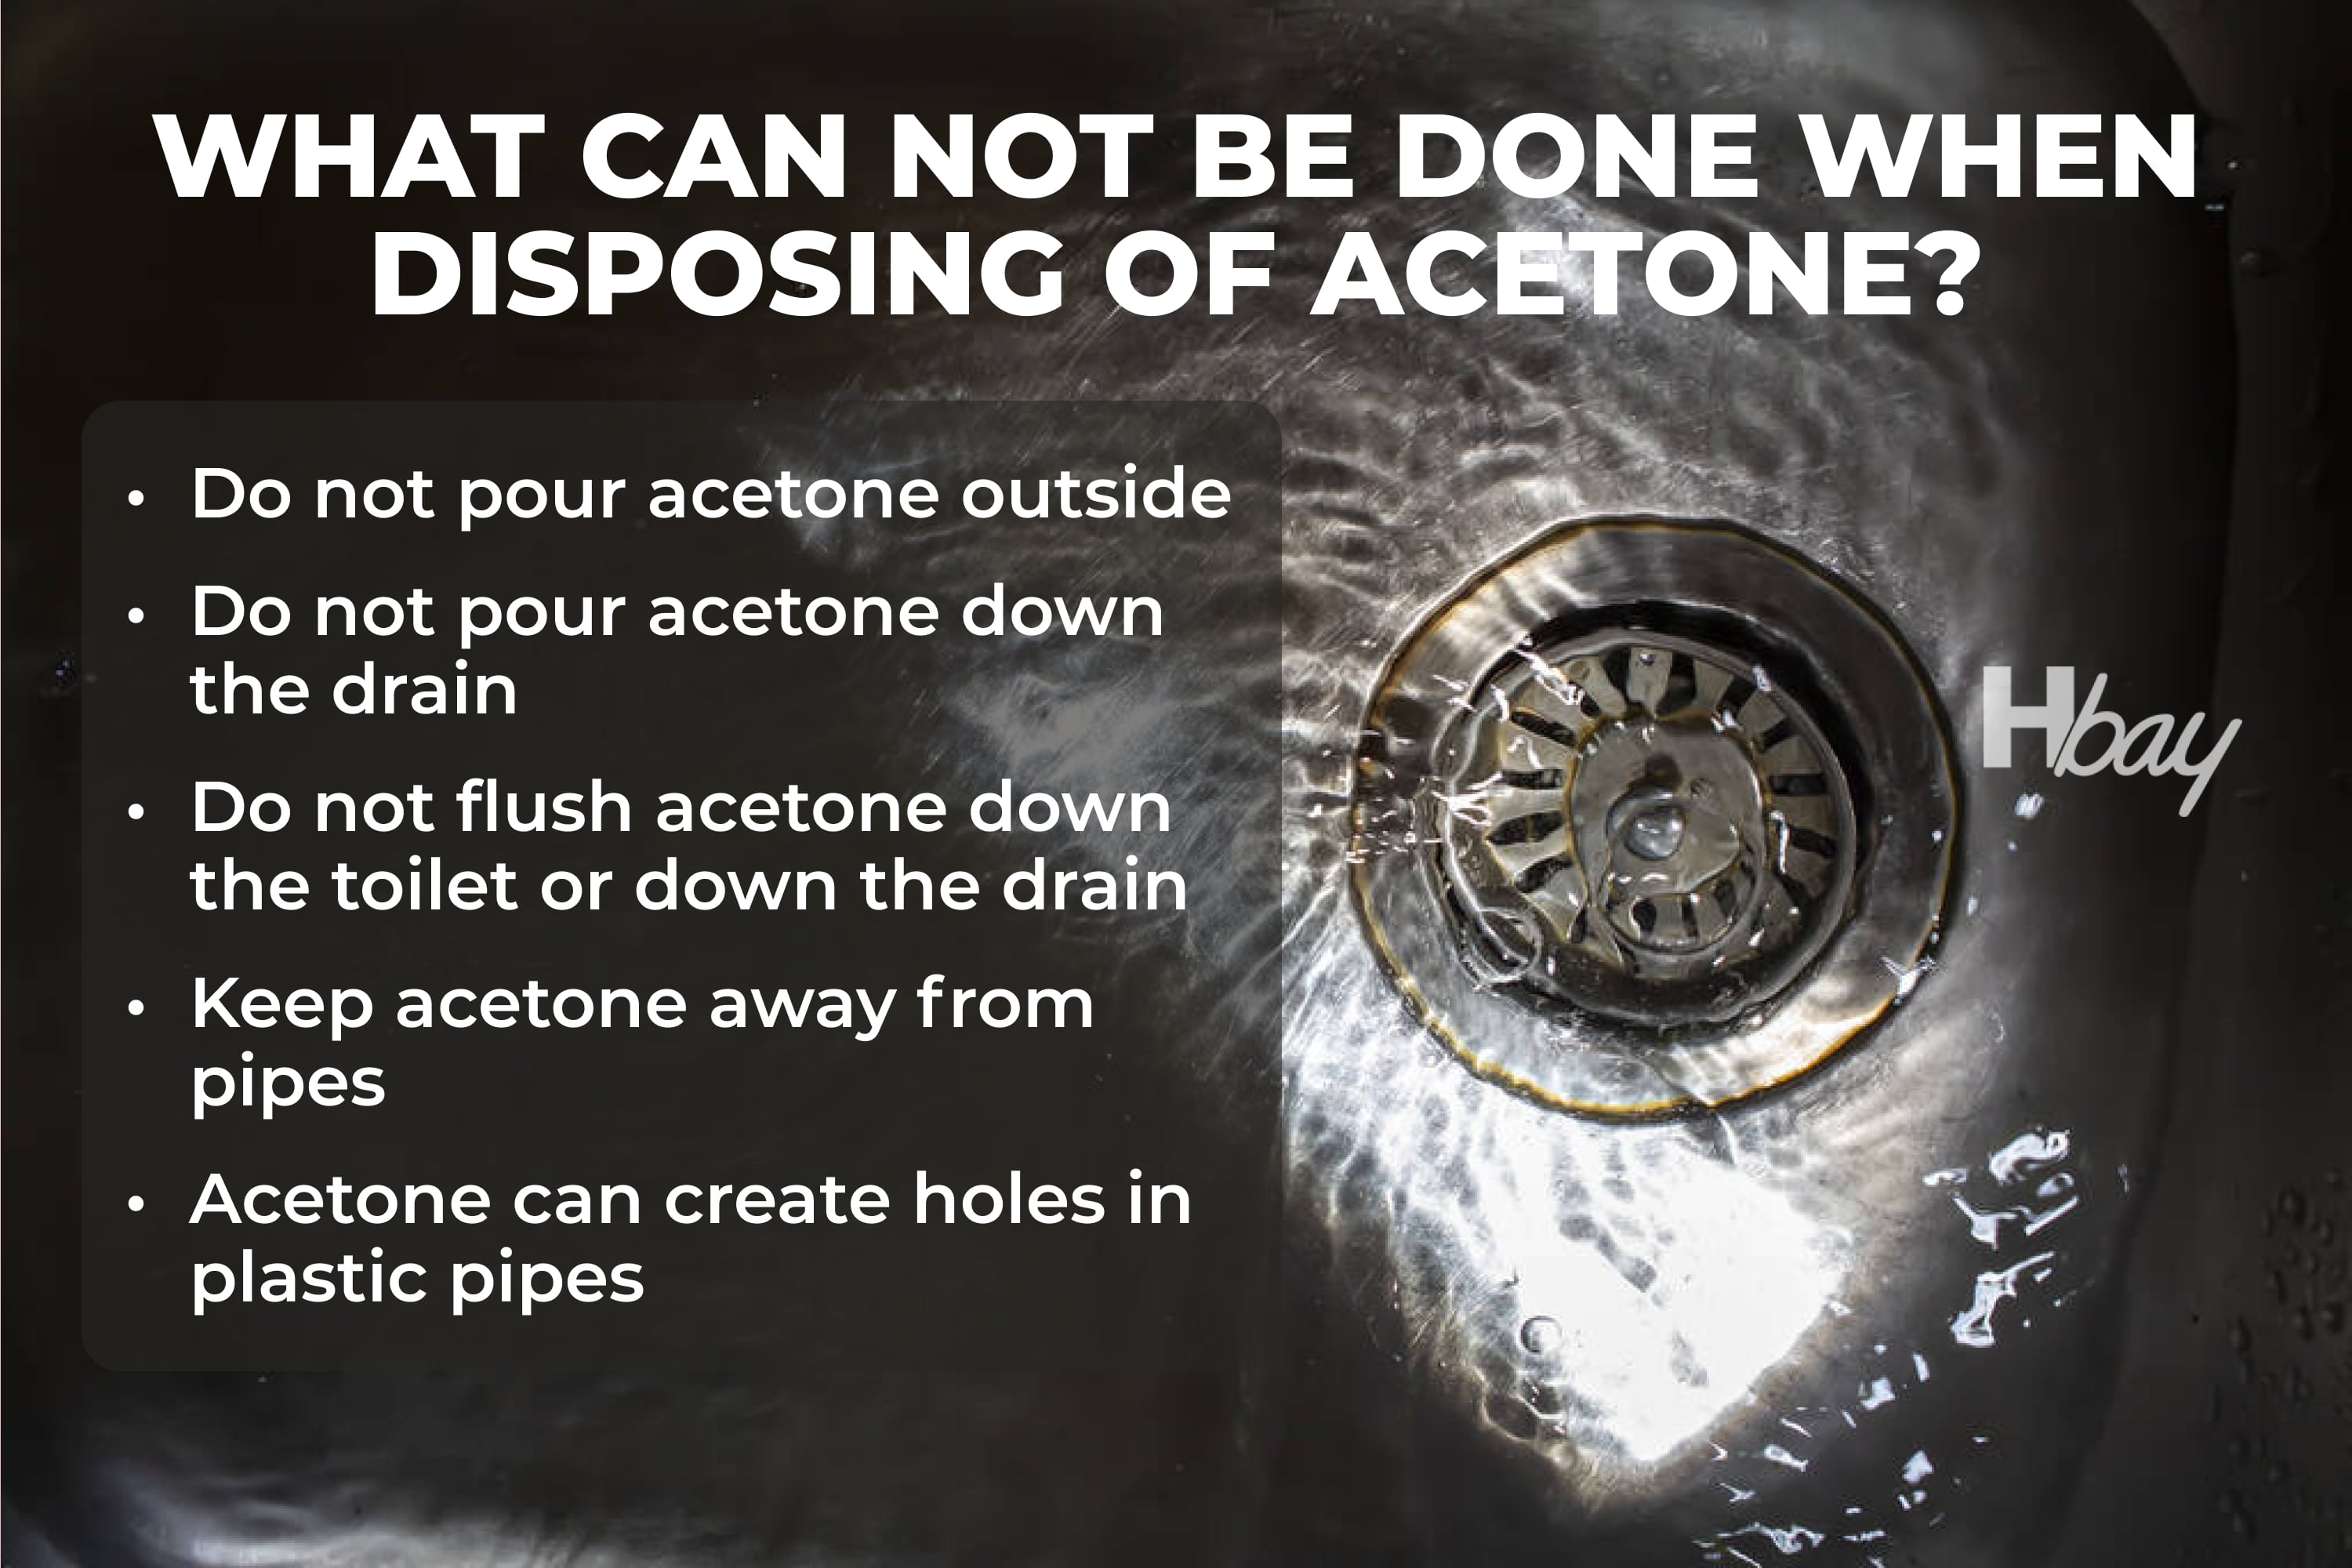 What can not be done when disposing of acetone